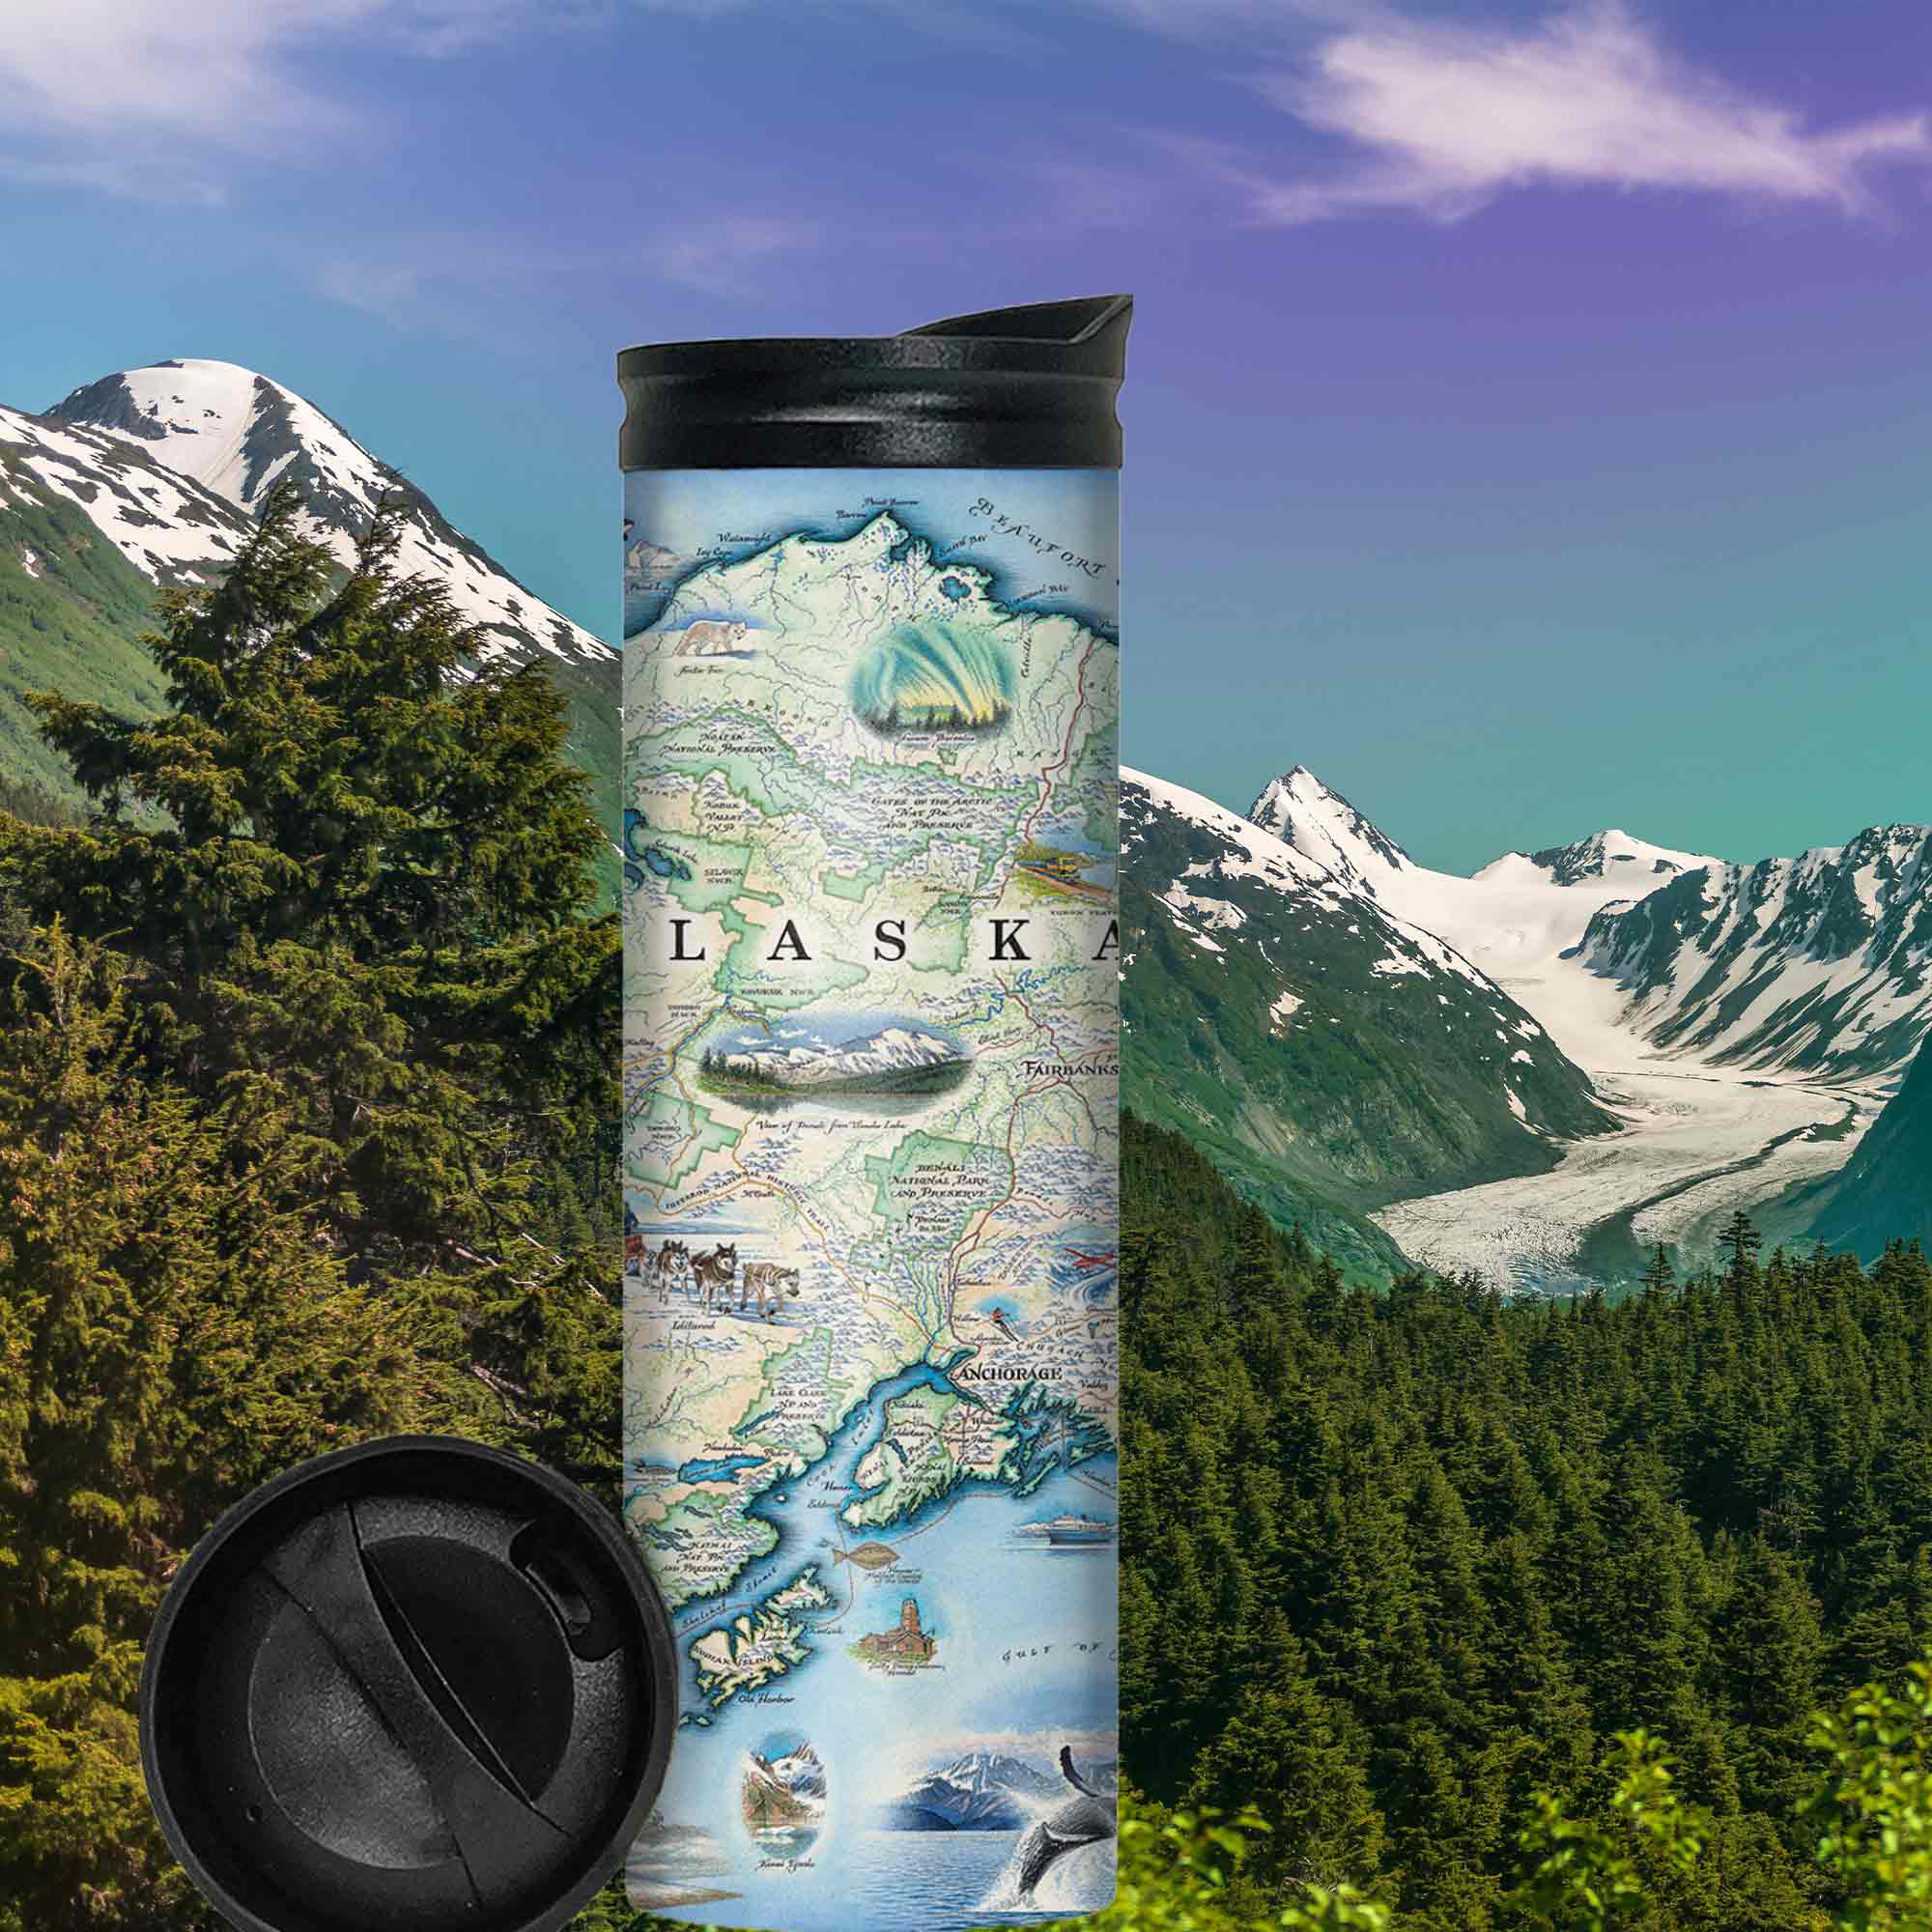 Alaska State Map 16 oz Travel Drinkware in earth tone colors sitting on rocks by water during sunset or sunrise.